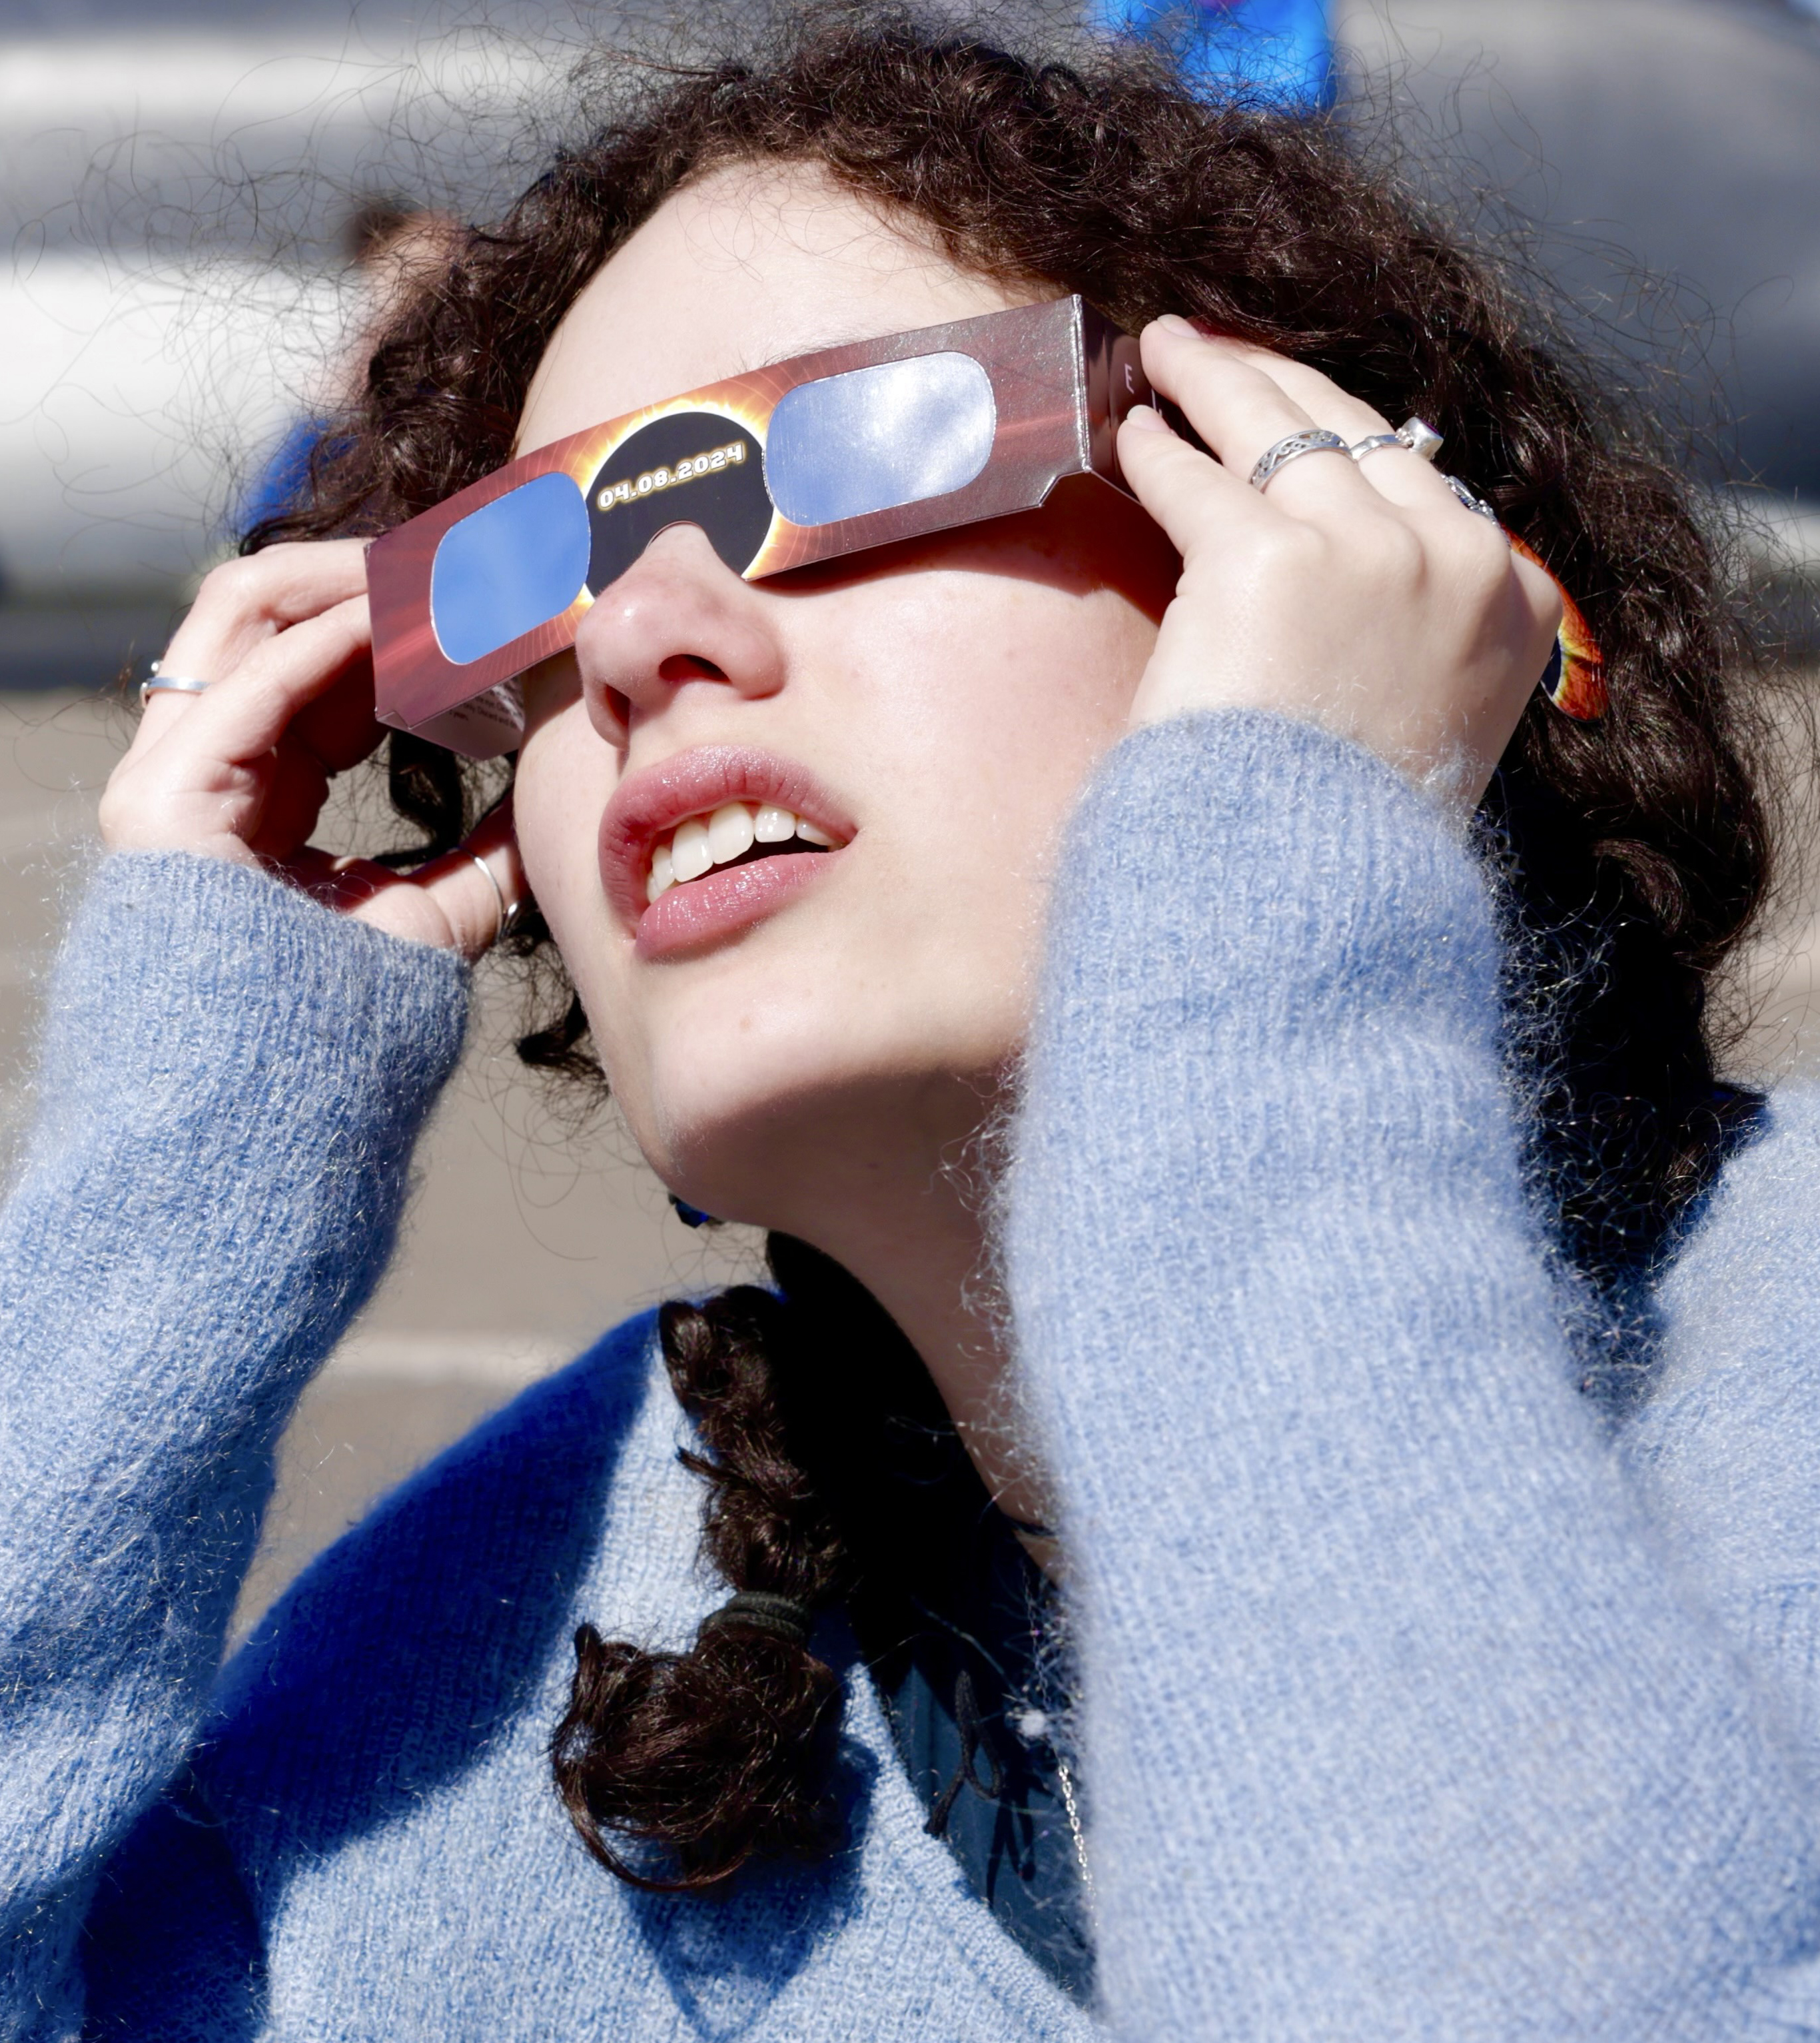 A person is wearing eclipse glasses and looking upwards, with curly hair and a blue sweater.